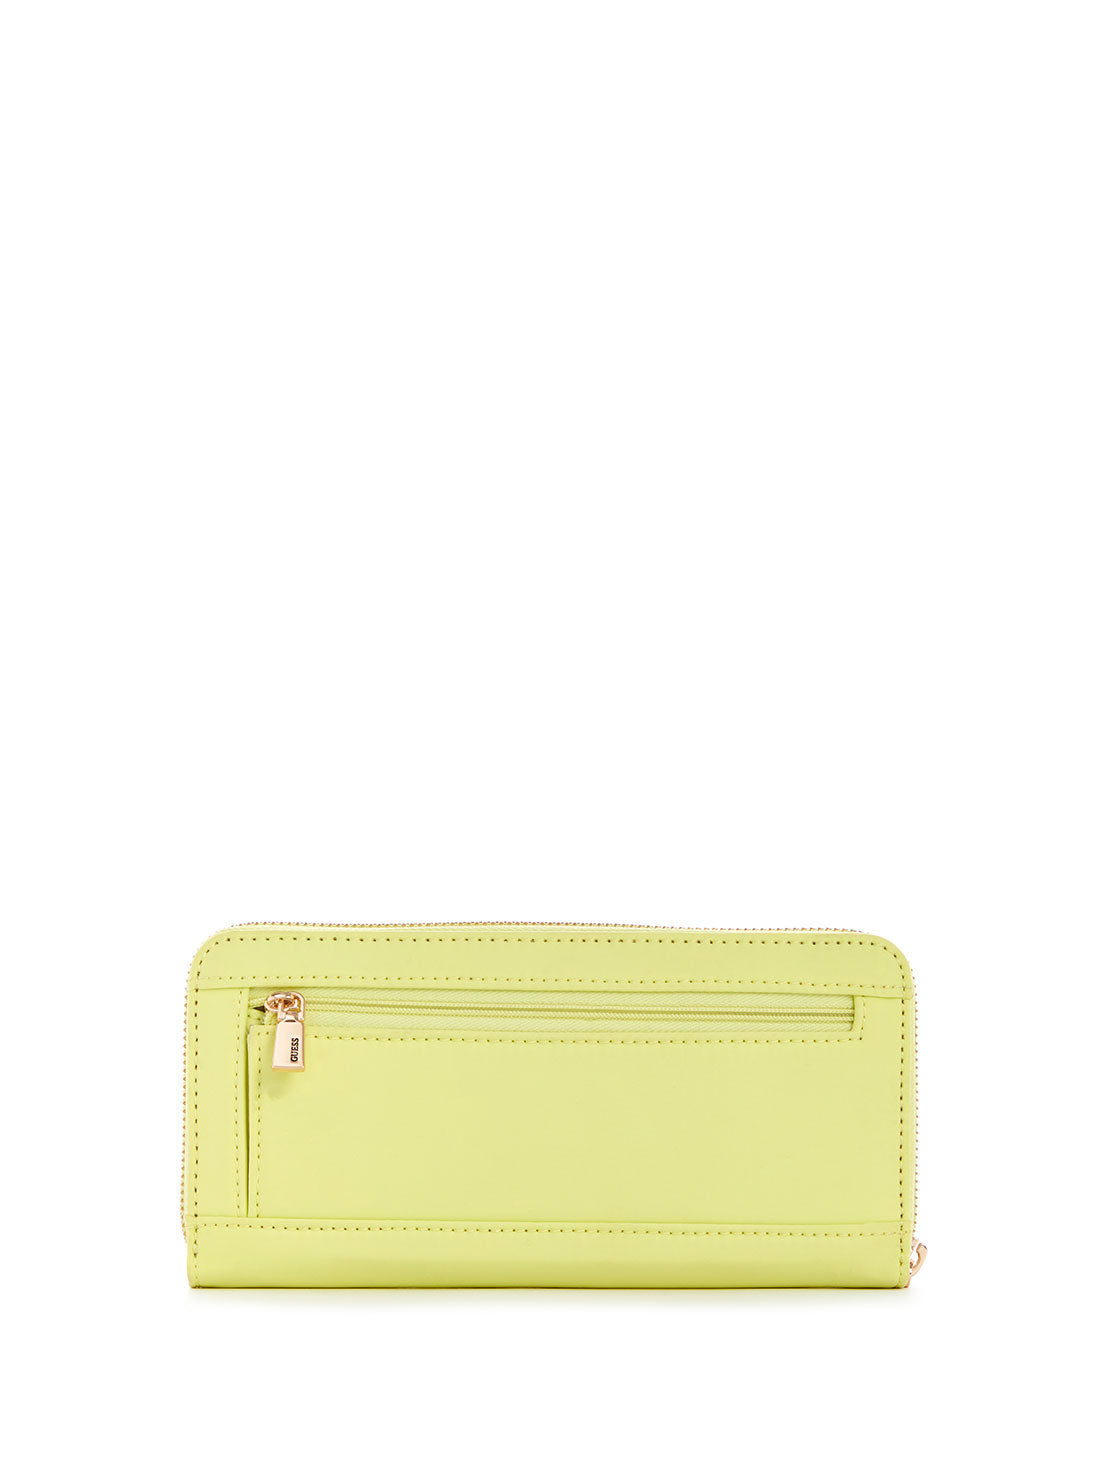 GUESS Women's Eco Lime Green Gemma Large Wallet EYG839546 Back View